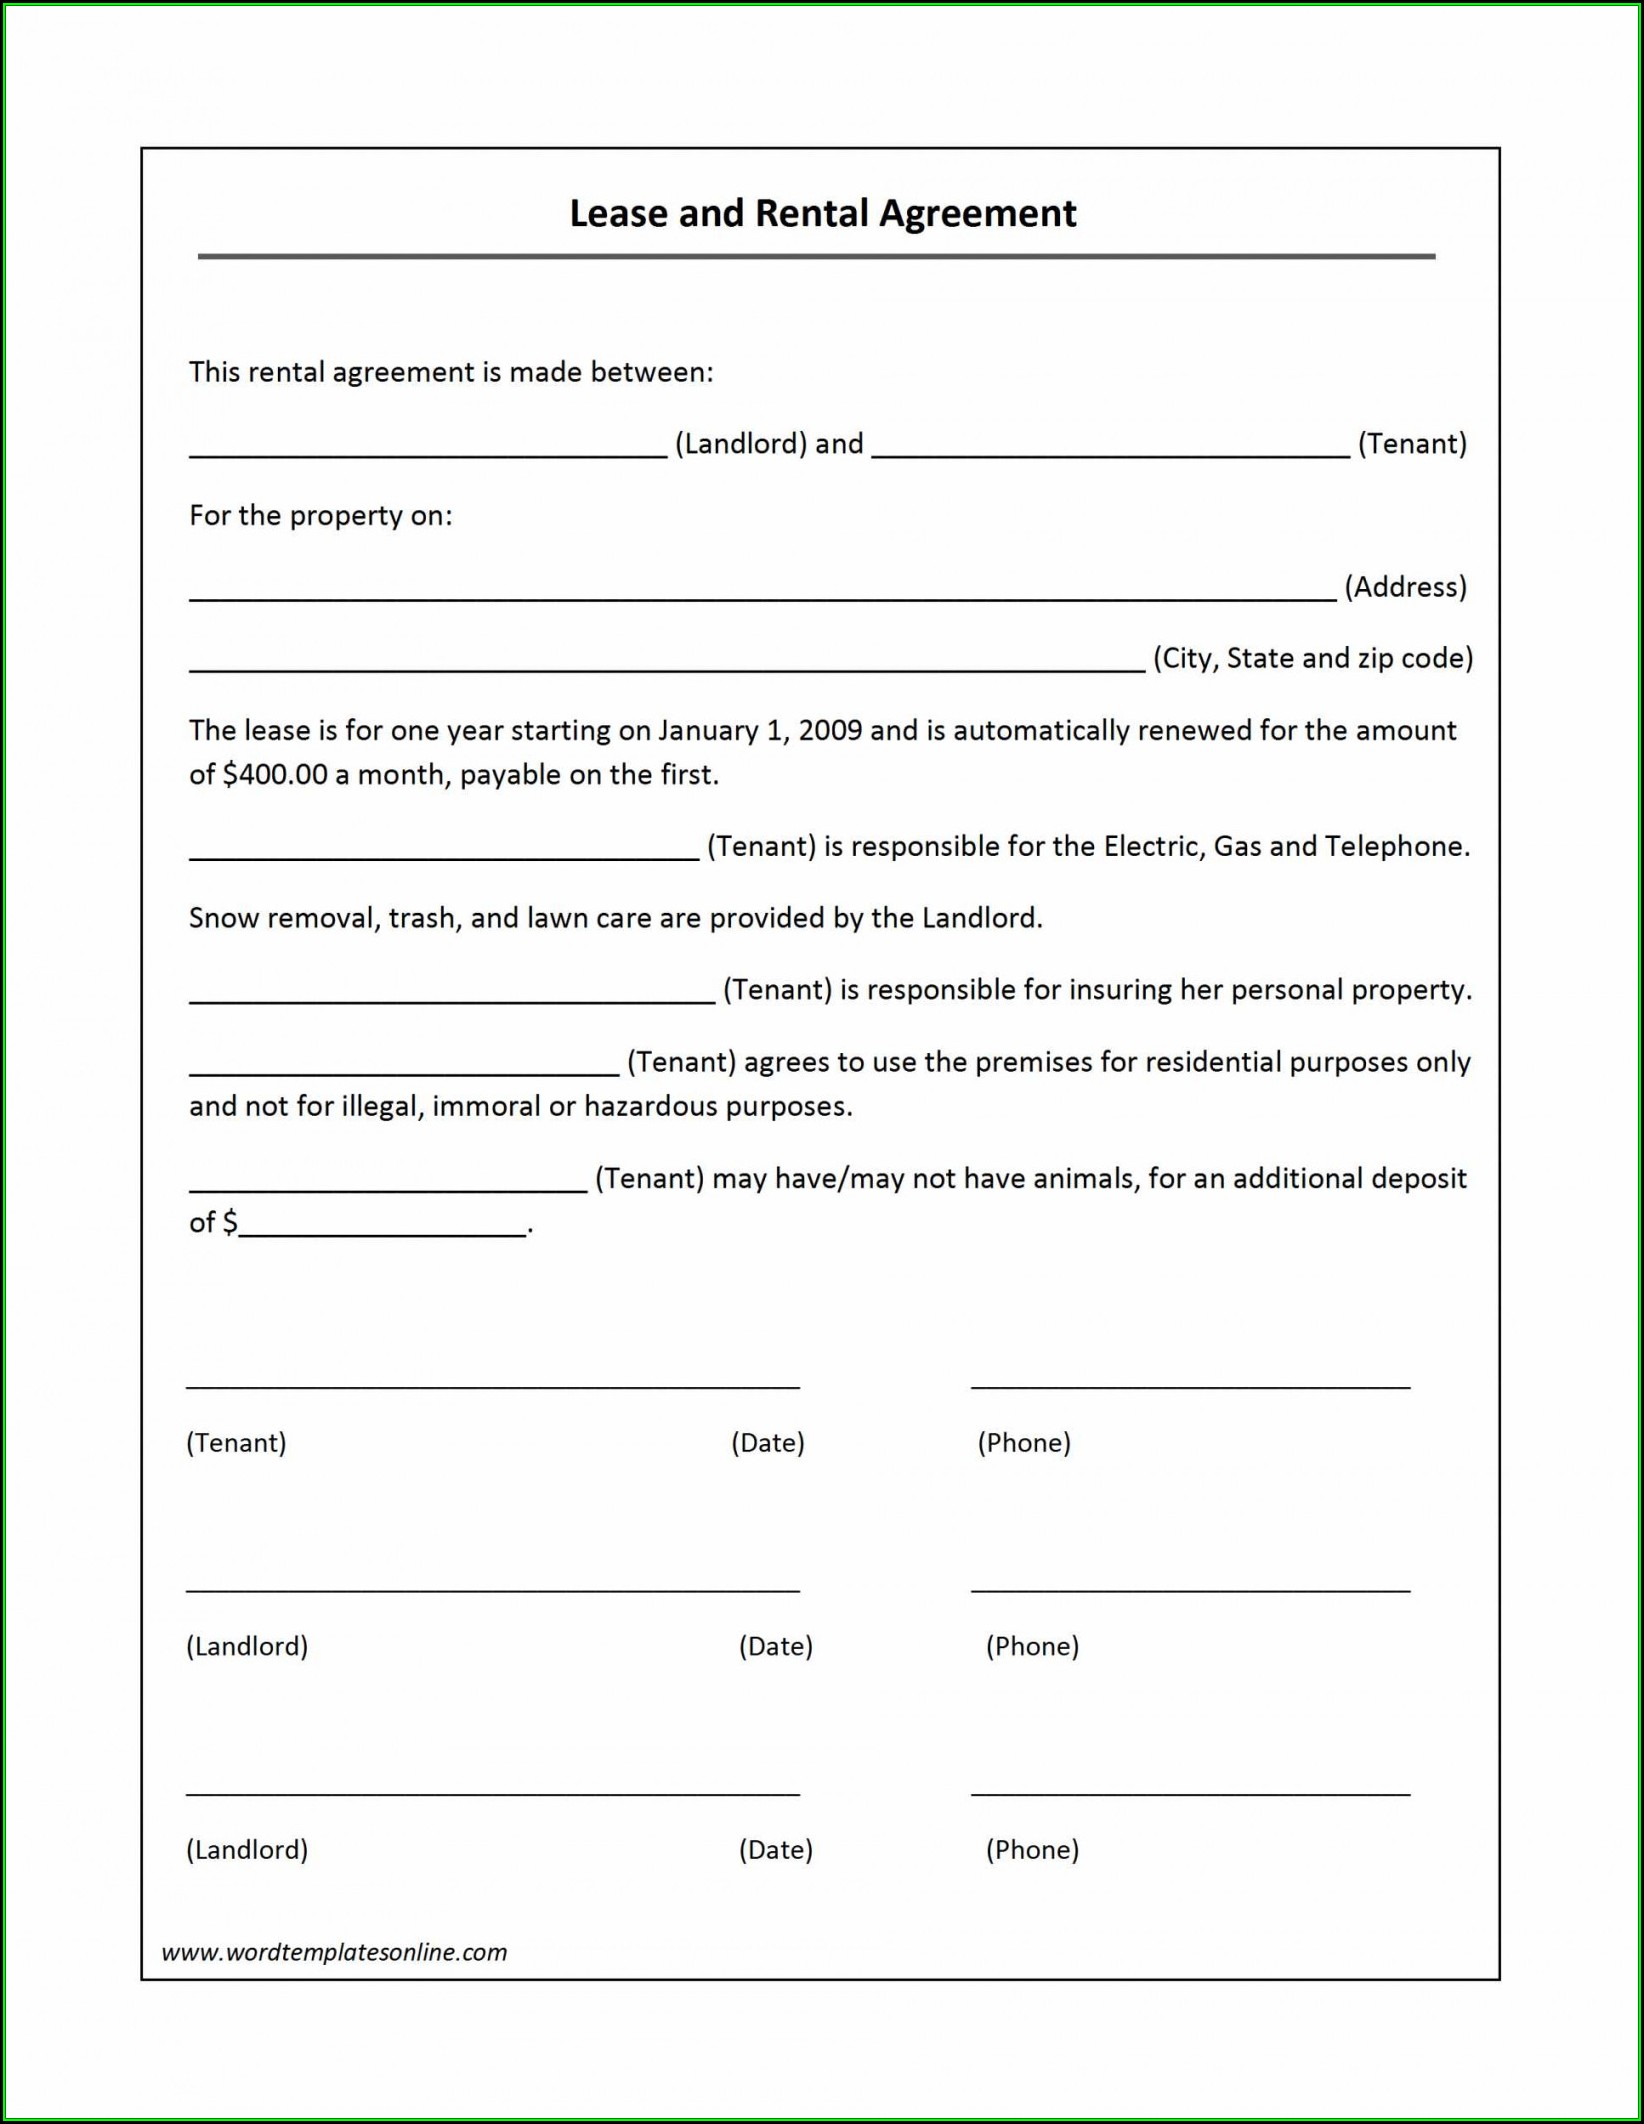 commercial-lease-agreement-template-word-south-africa-template-1